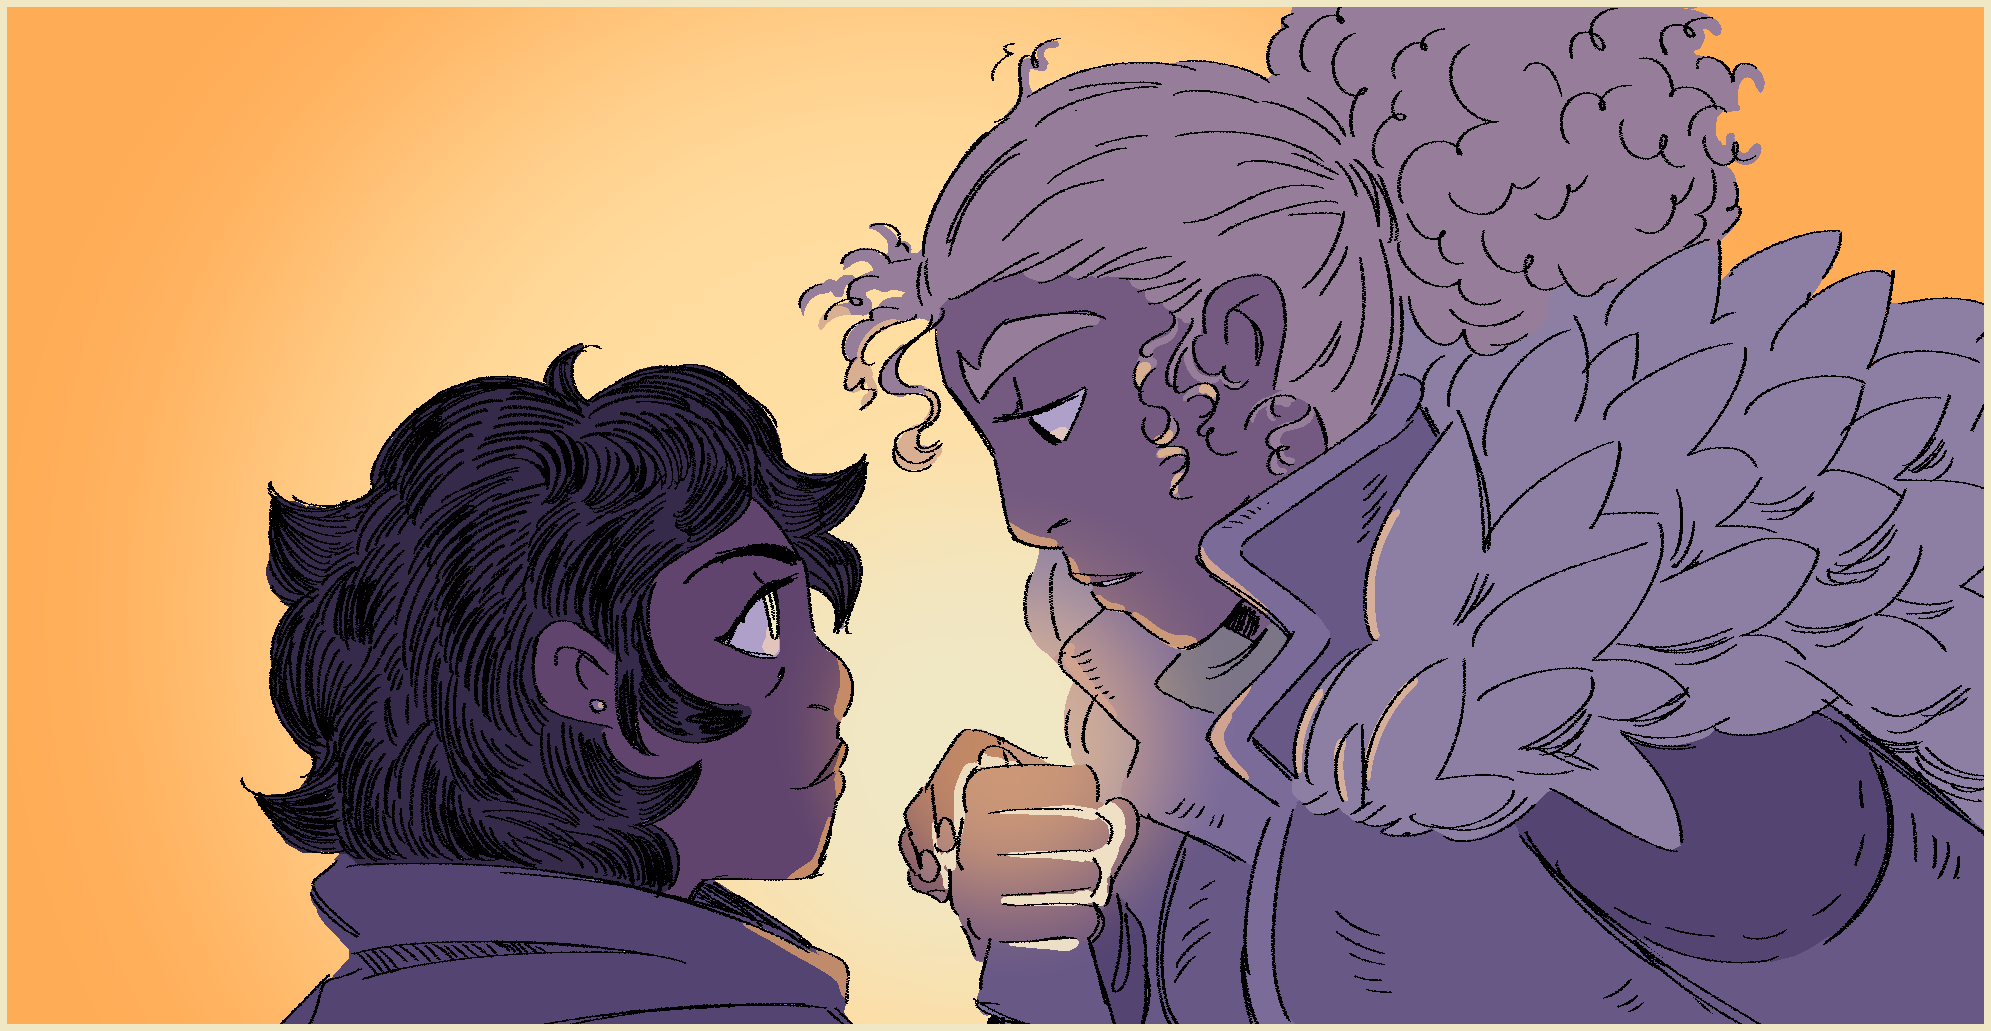 A drawing of Sol and Nyx with their hands clasped together and staring into each other's eyes. There is light emanating from between where their hands are held together.